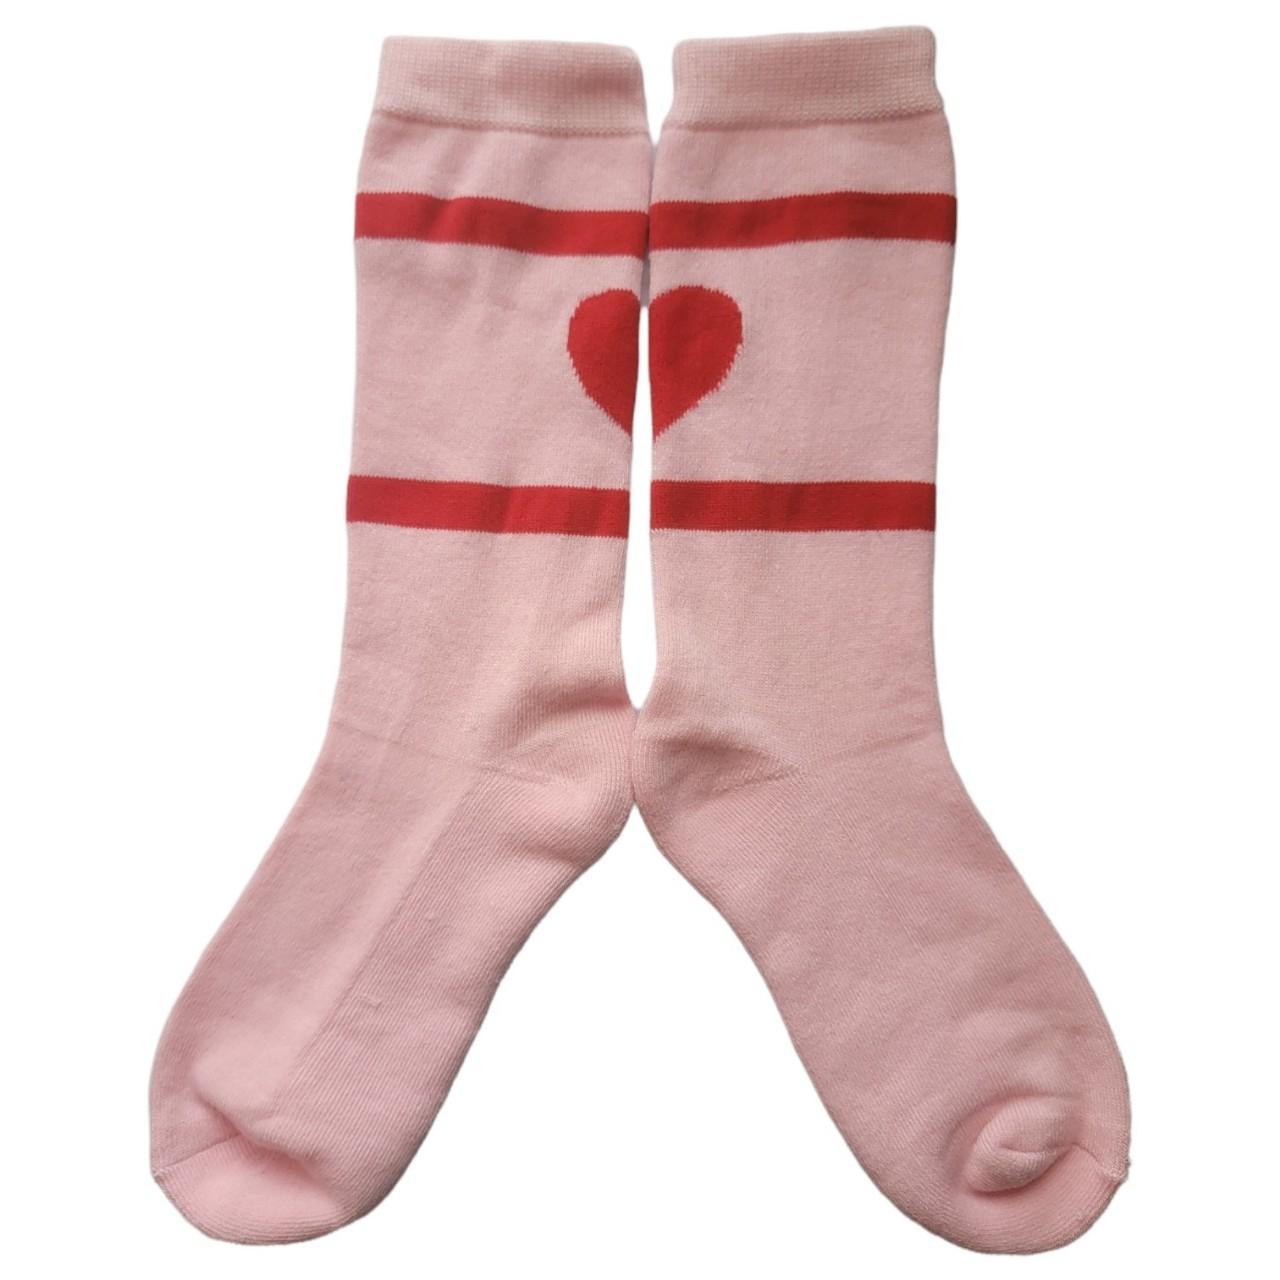 Hot Topic Women's Red and Pink Socks